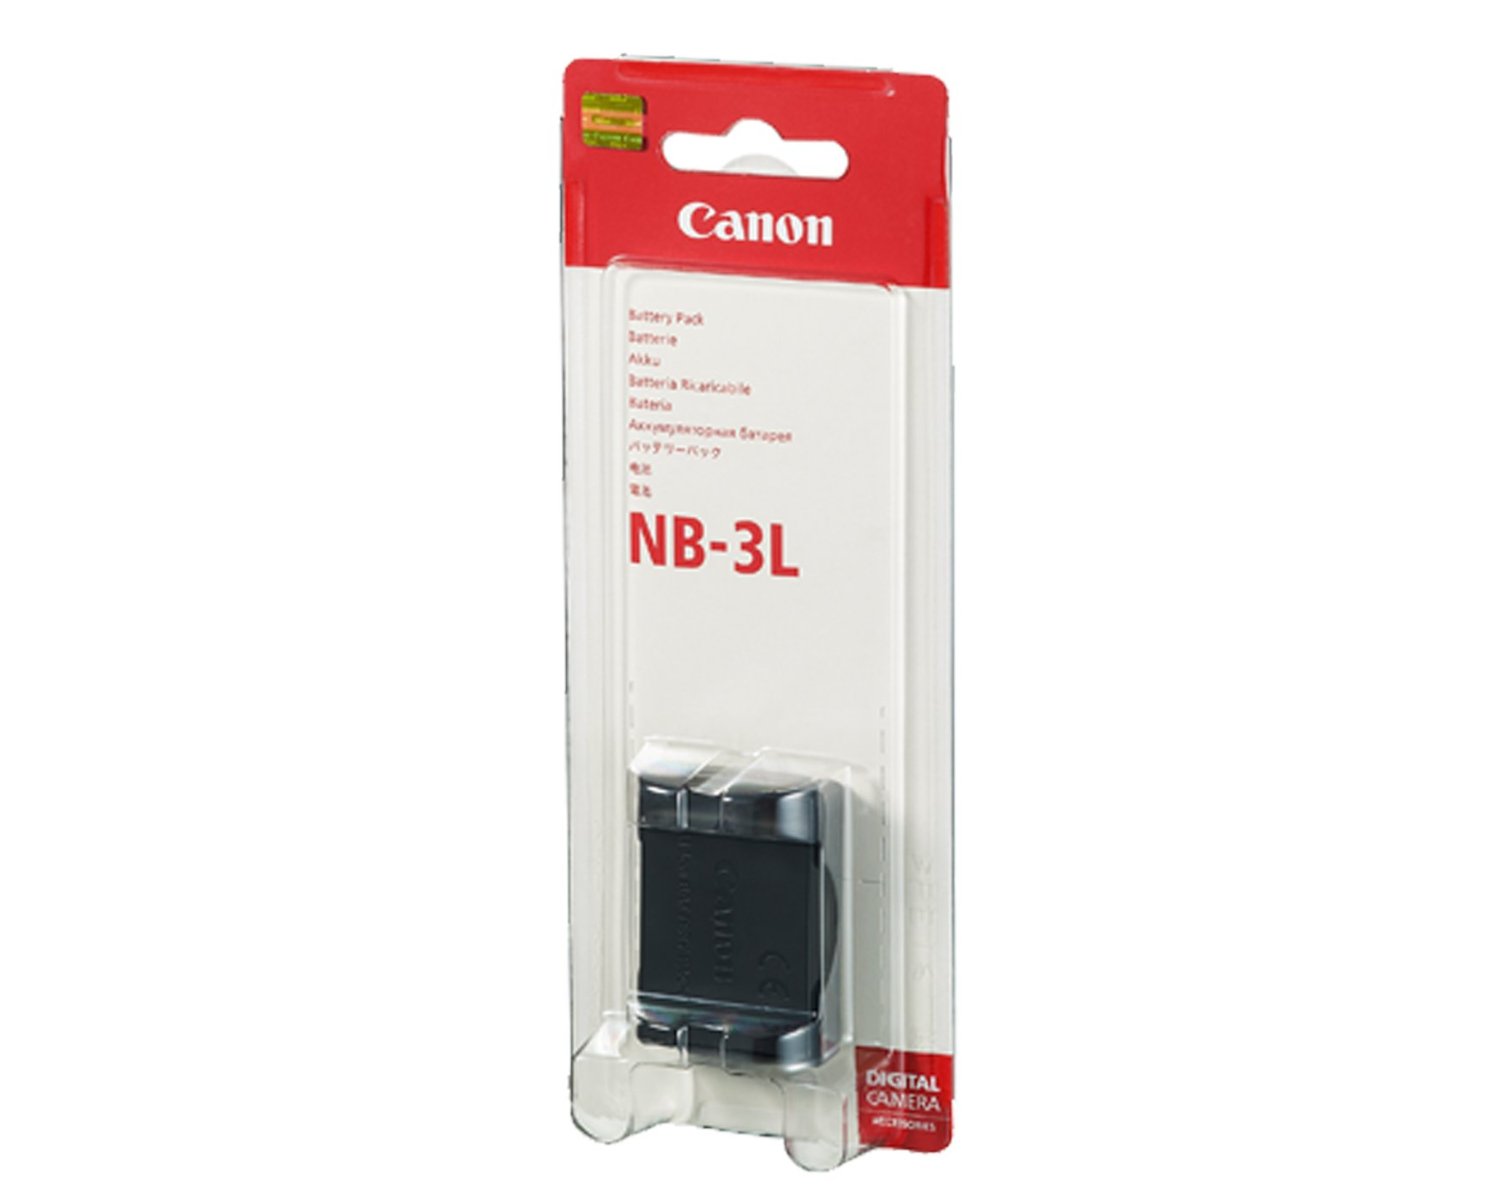 Canon Battery Pack NB-3L